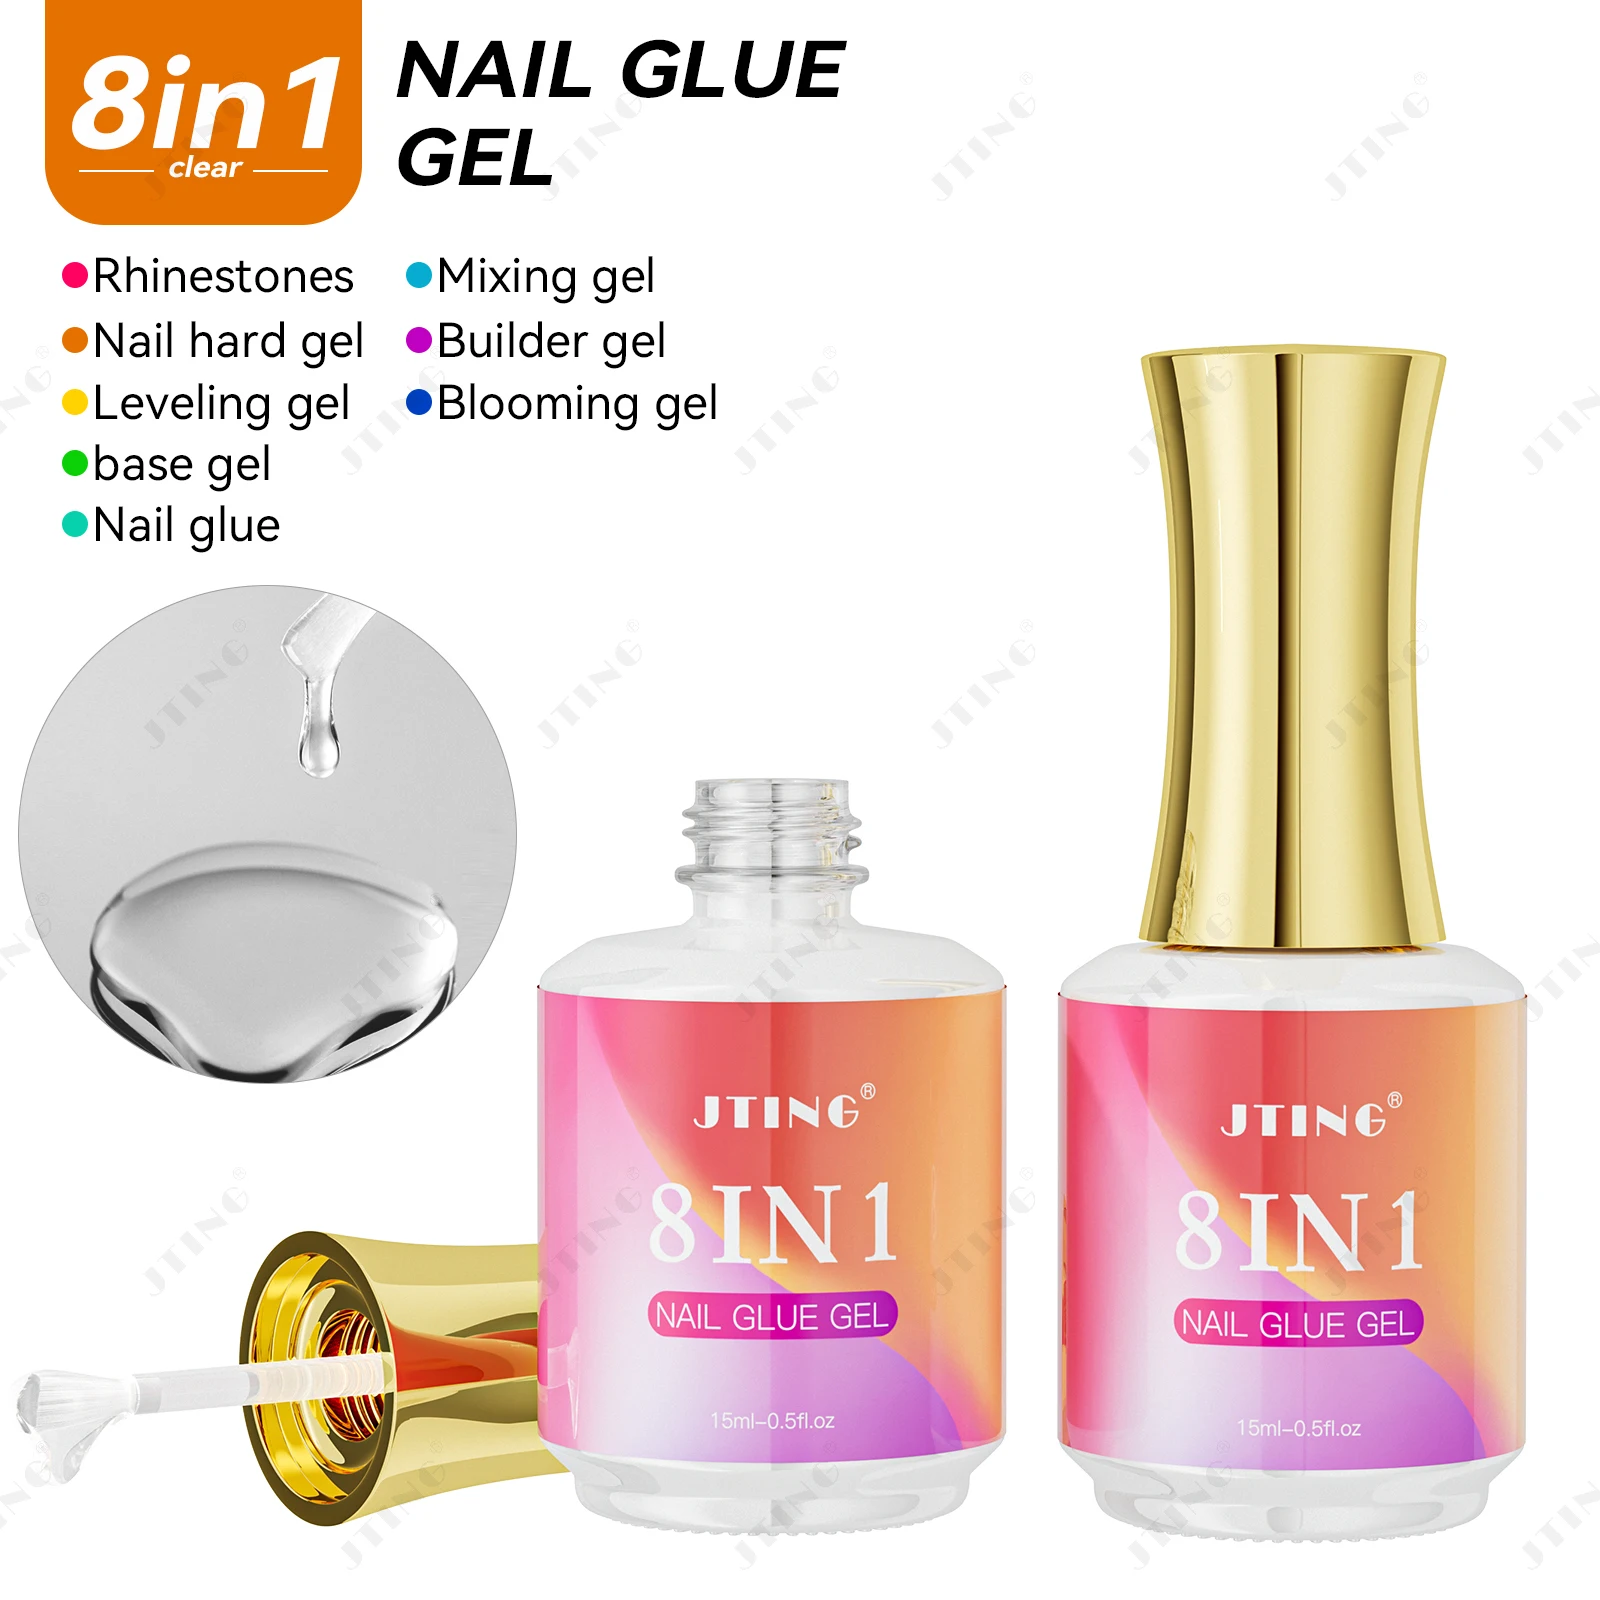 

JTING New arrival 8 IN 1 nail function glue gel for Rhinestone Nail hard Builder Base gel Mixing and Leveling OEM ODM